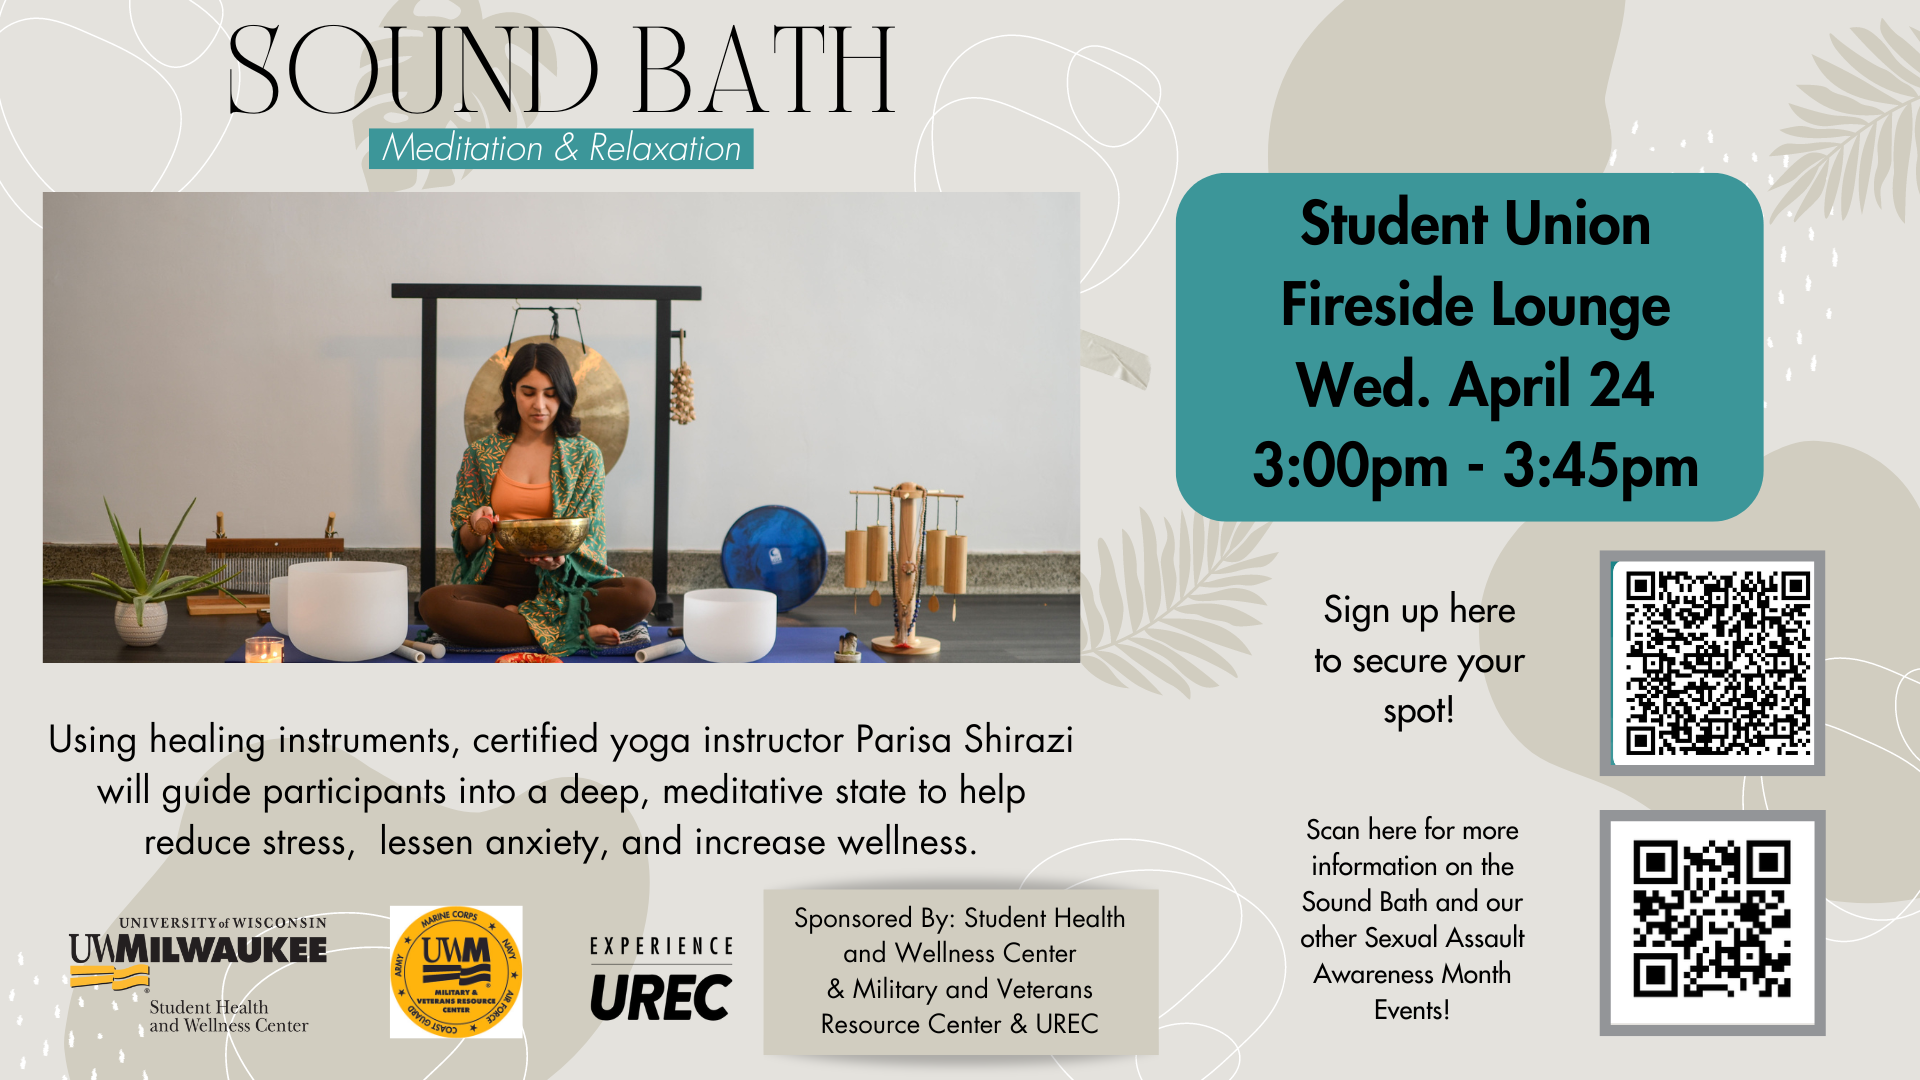 A graphic providing information about a sound bath event in the Union on April 24 from 3-3:45 pm